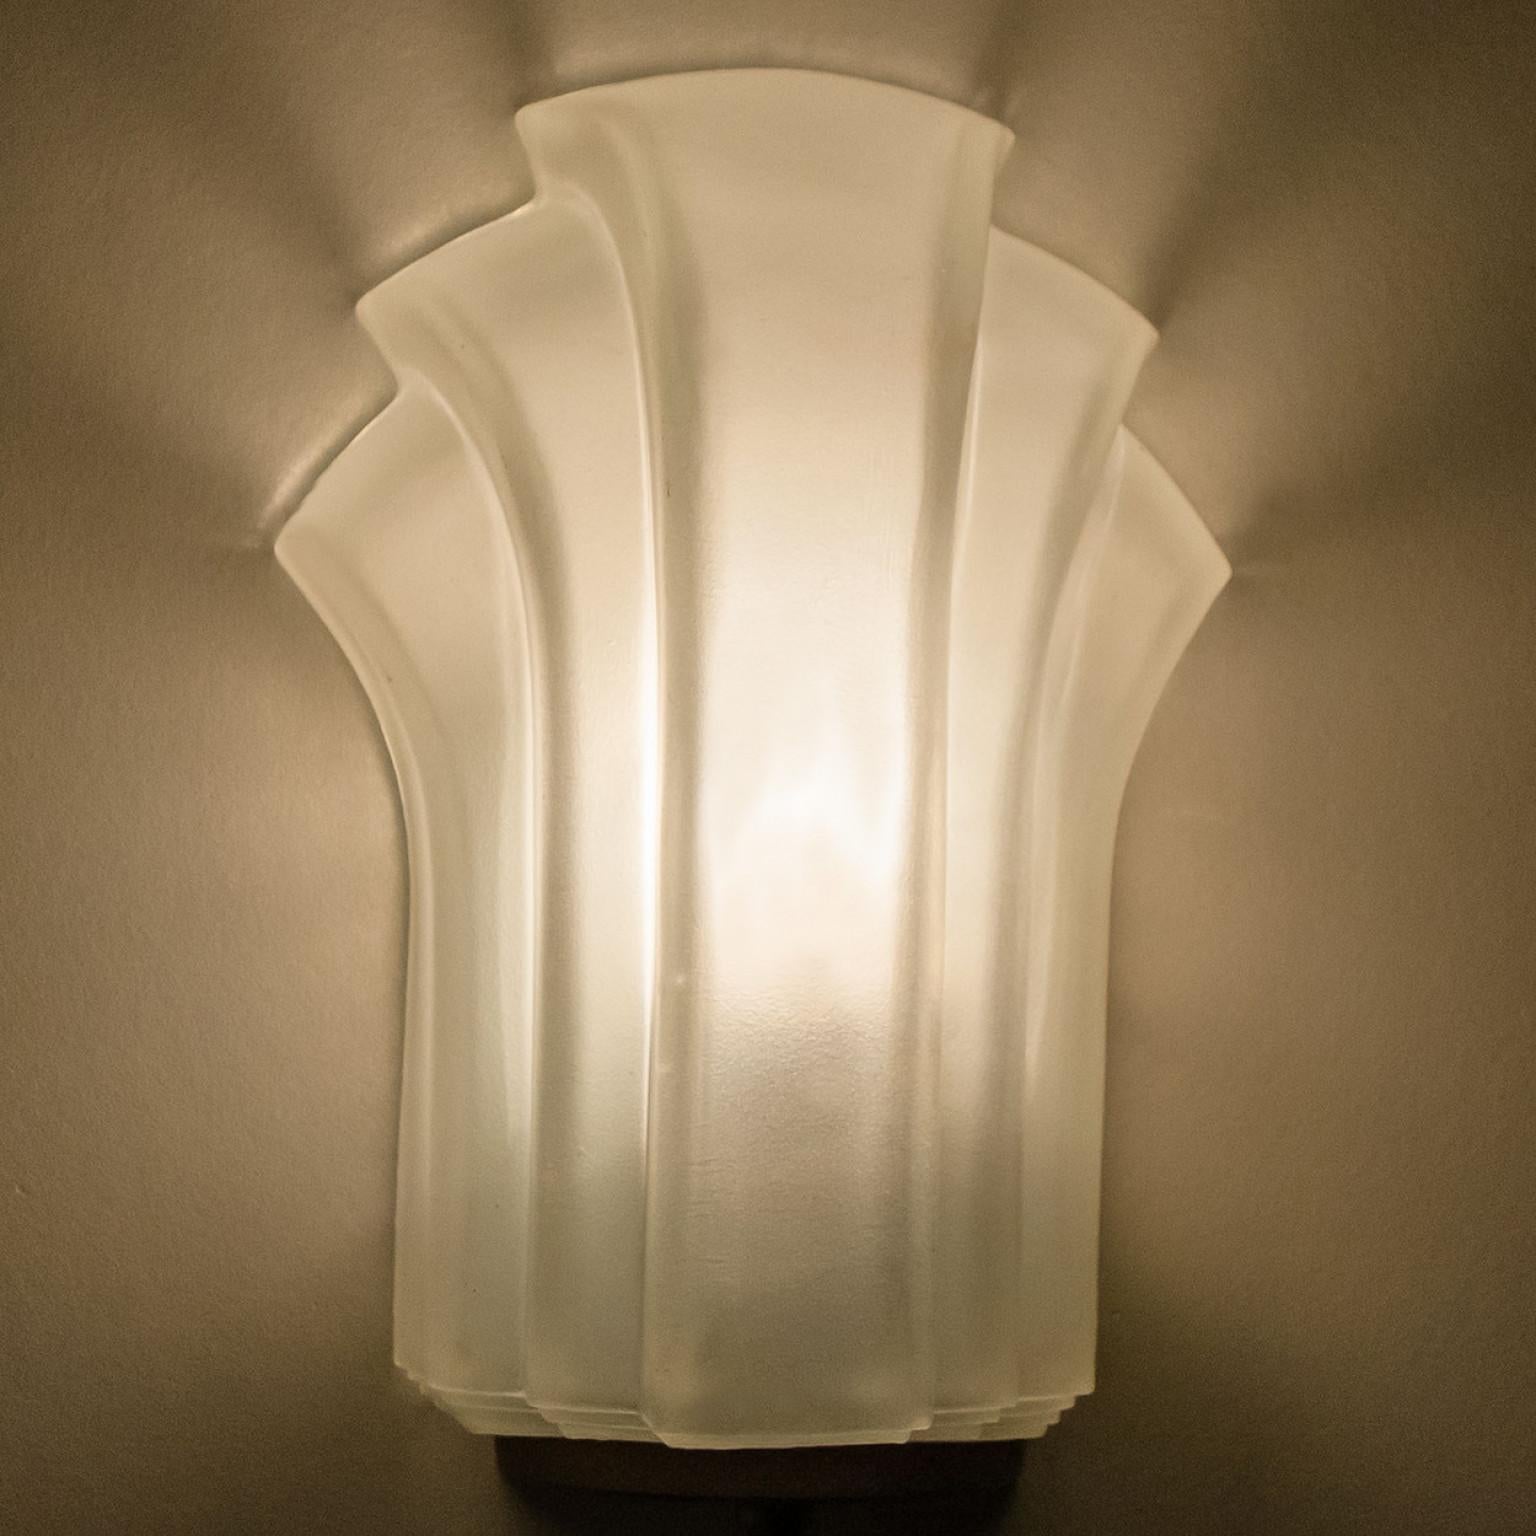 1 of the 4 Pairs Art Deco Style Milk Glass Shell Wall Lights, Germany, 1970 For Sale 5